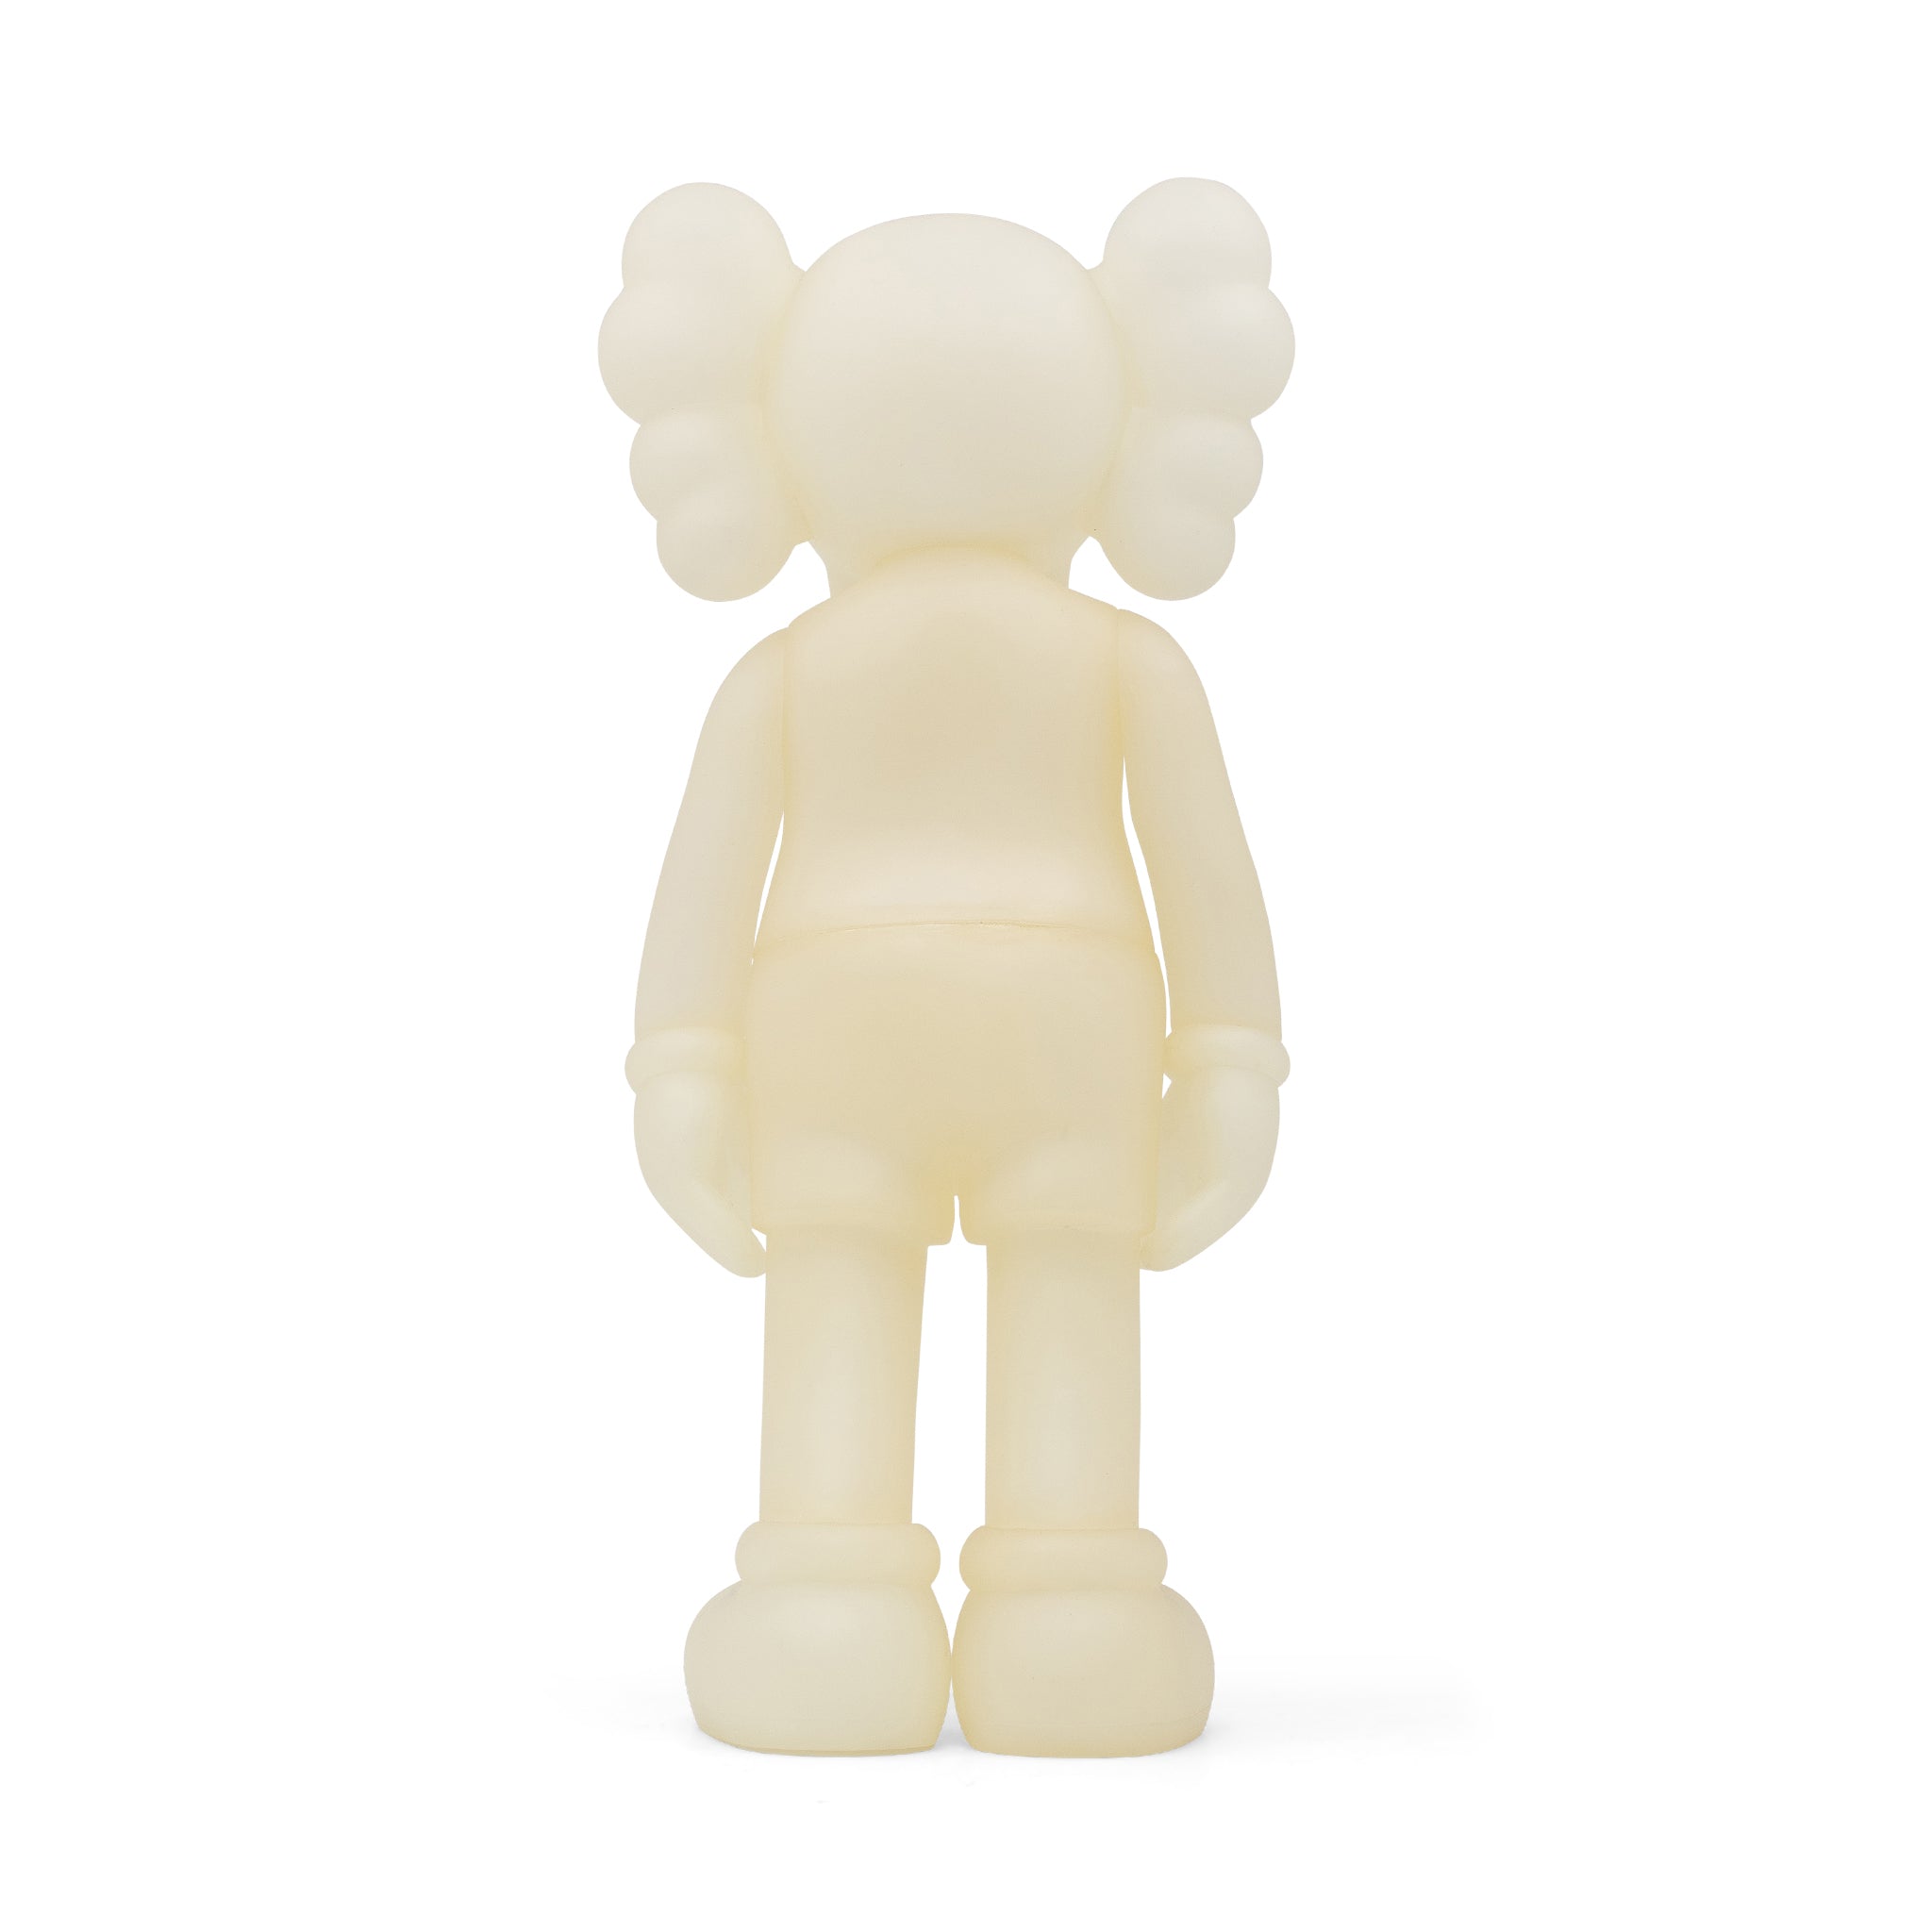 KAWS FIVE YEARS LATER COMPANION GLOW IN THE DARK (BLUE EYES)